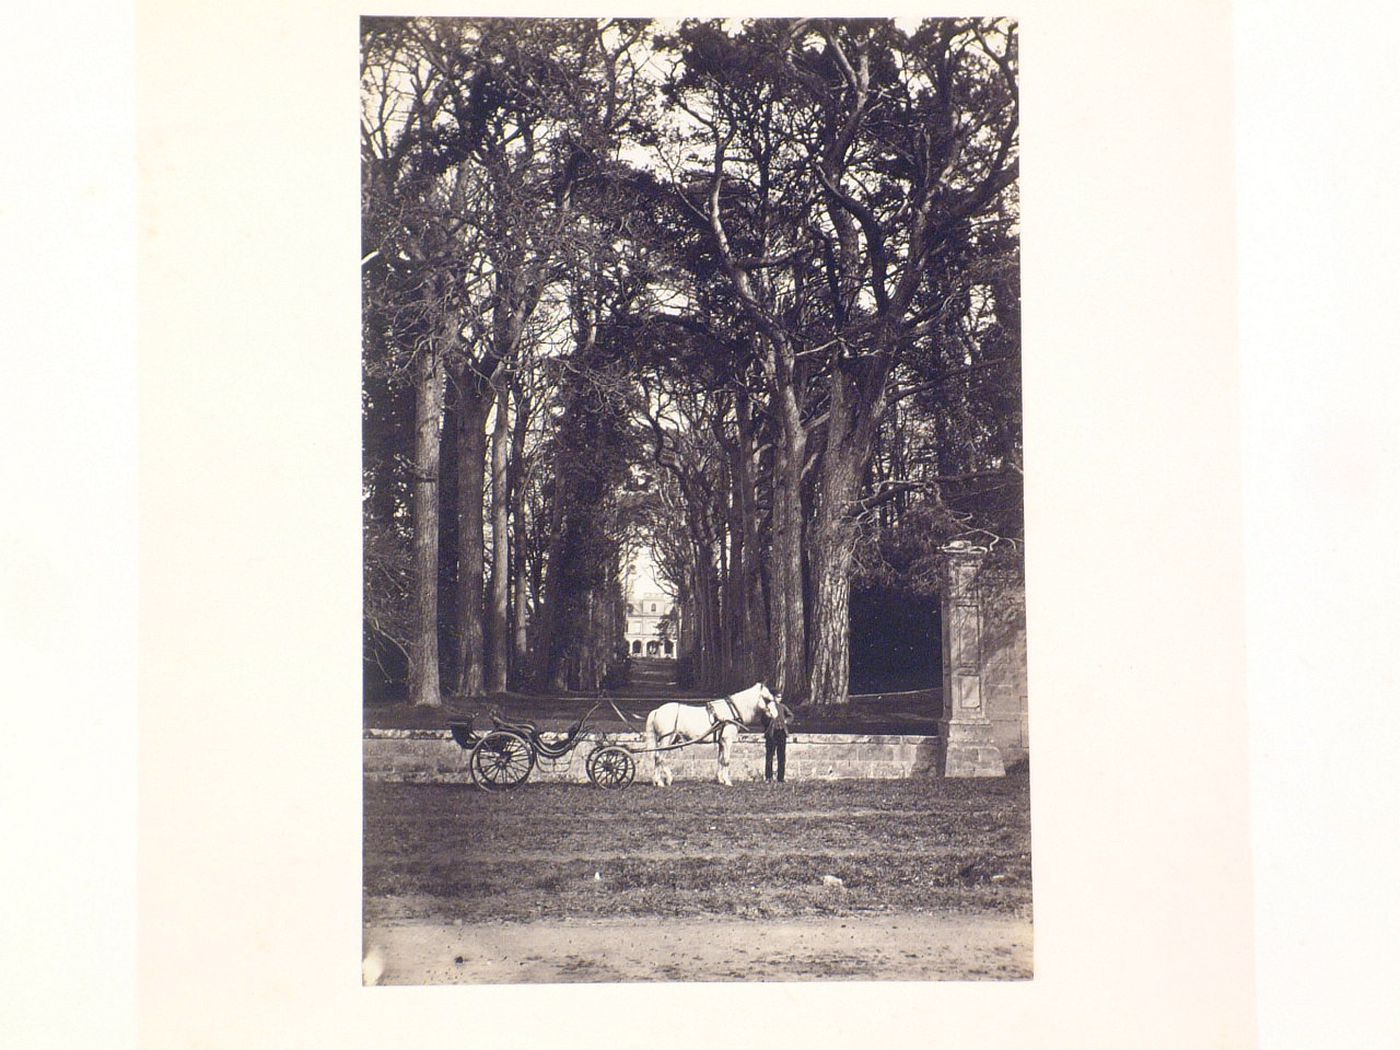 View of a distant house, seen through an arcade of trees, with a carriage in the foreground, England ?